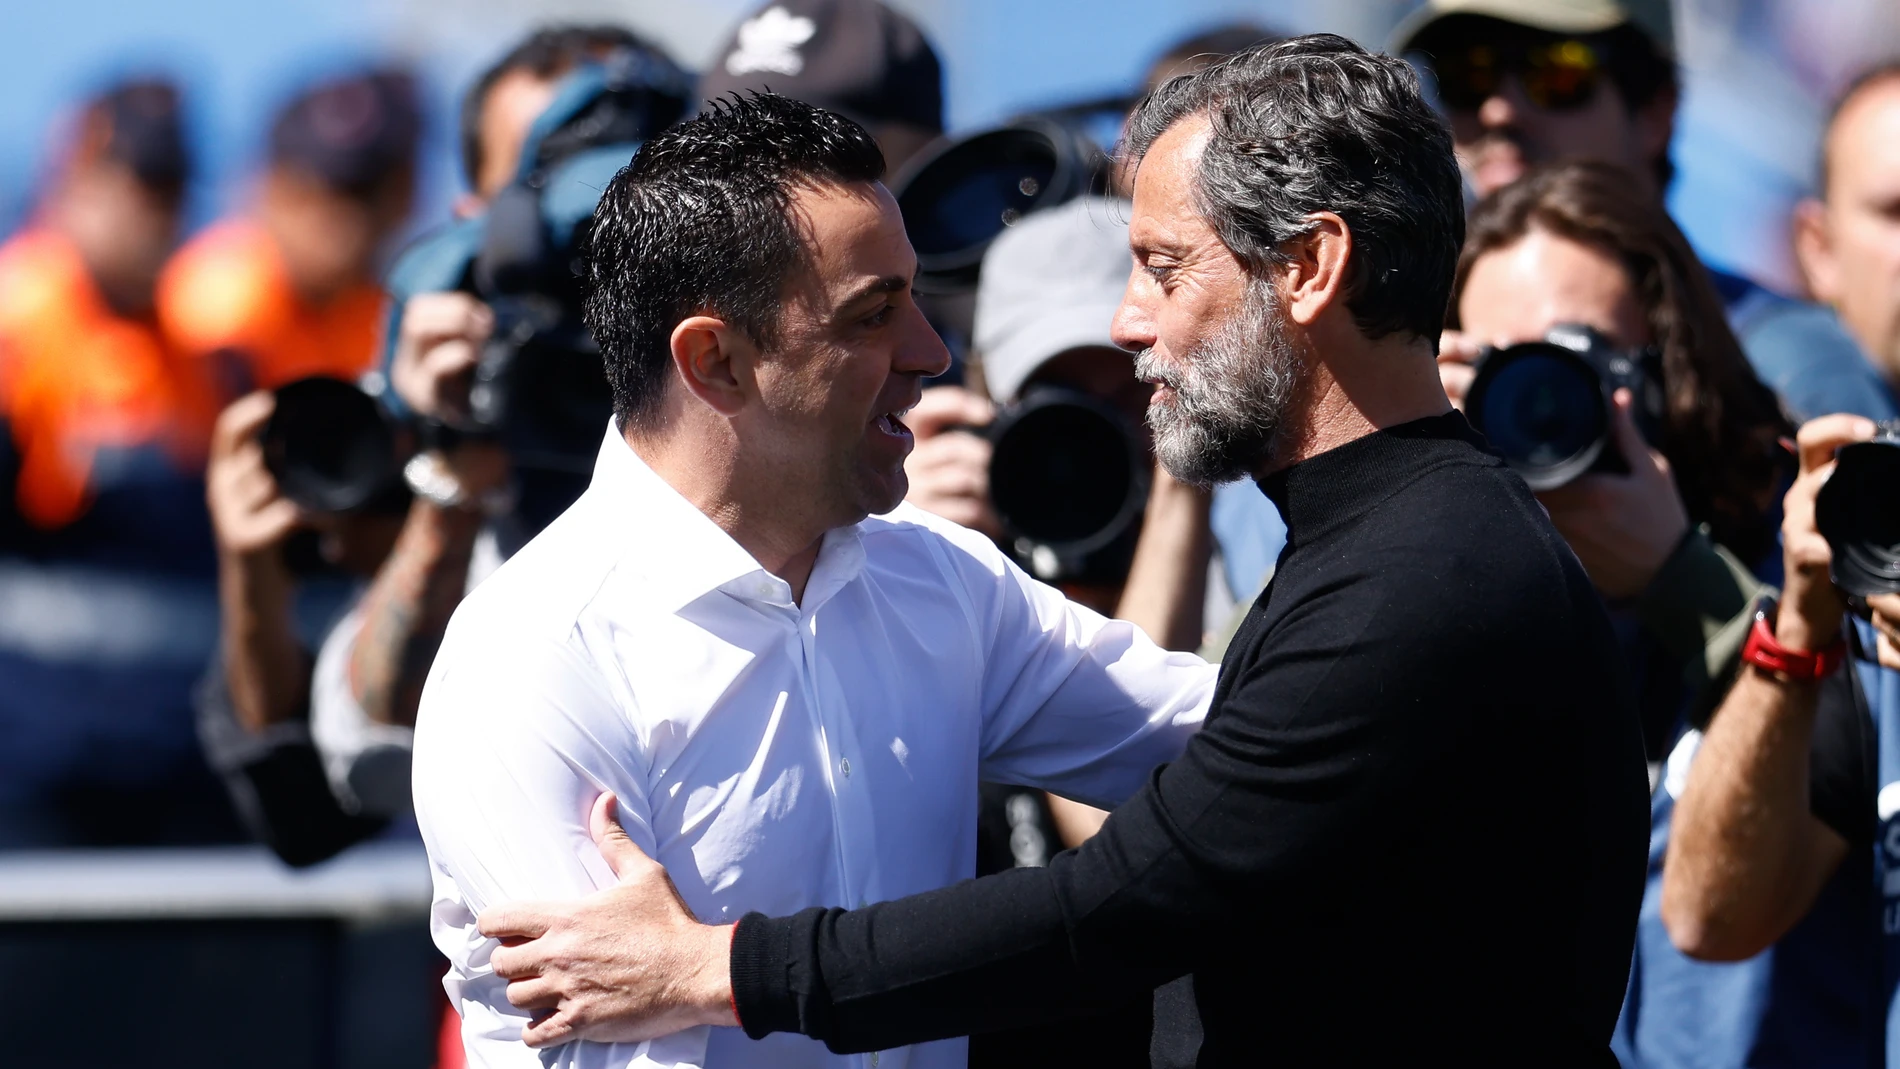 Xavi Hernandez, head coach of FC Barcelona, saludates to Quique Sanchez Flores, head coach of Getafe, during the spanish league, La Liga Santander, football match played between Getafe CF and FC Barcelona at Coliseum Alfonso Perez stadium on April 16, 2023, in Madrid, Spain. Oscar J. Barroso / Afp7 16/04/2023 ONLY FOR USE IN SPAIN